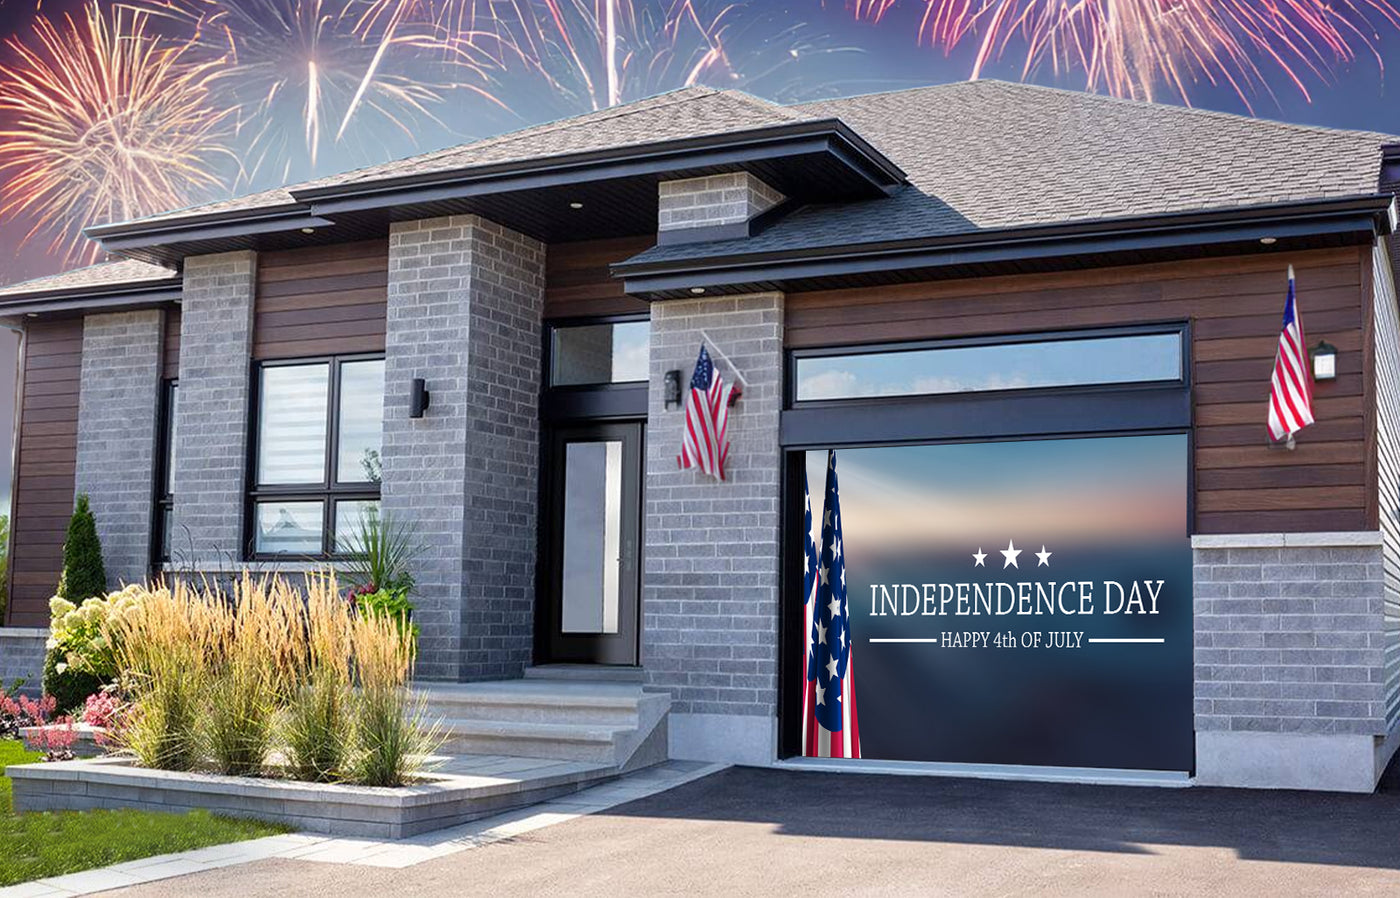 Independence Day USA Flag Happy 4th of July Garage Door Cover Banner